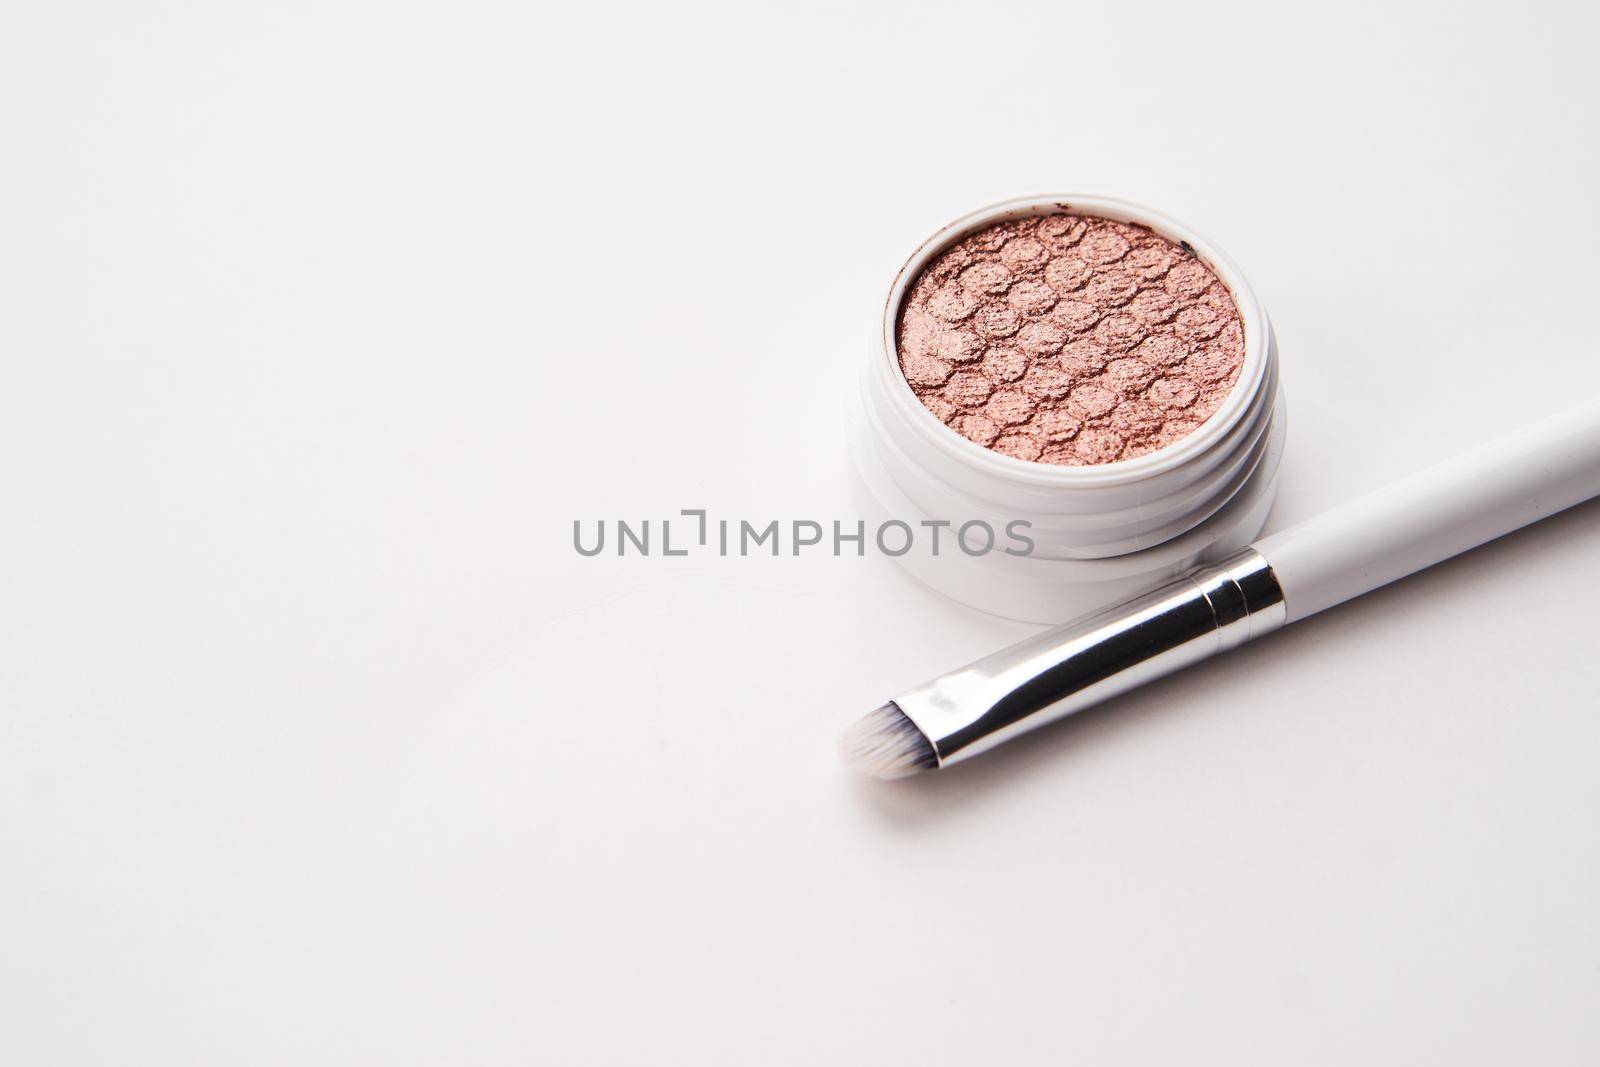 cosmetics decoration accessories beauty makeup top view. High quality photo